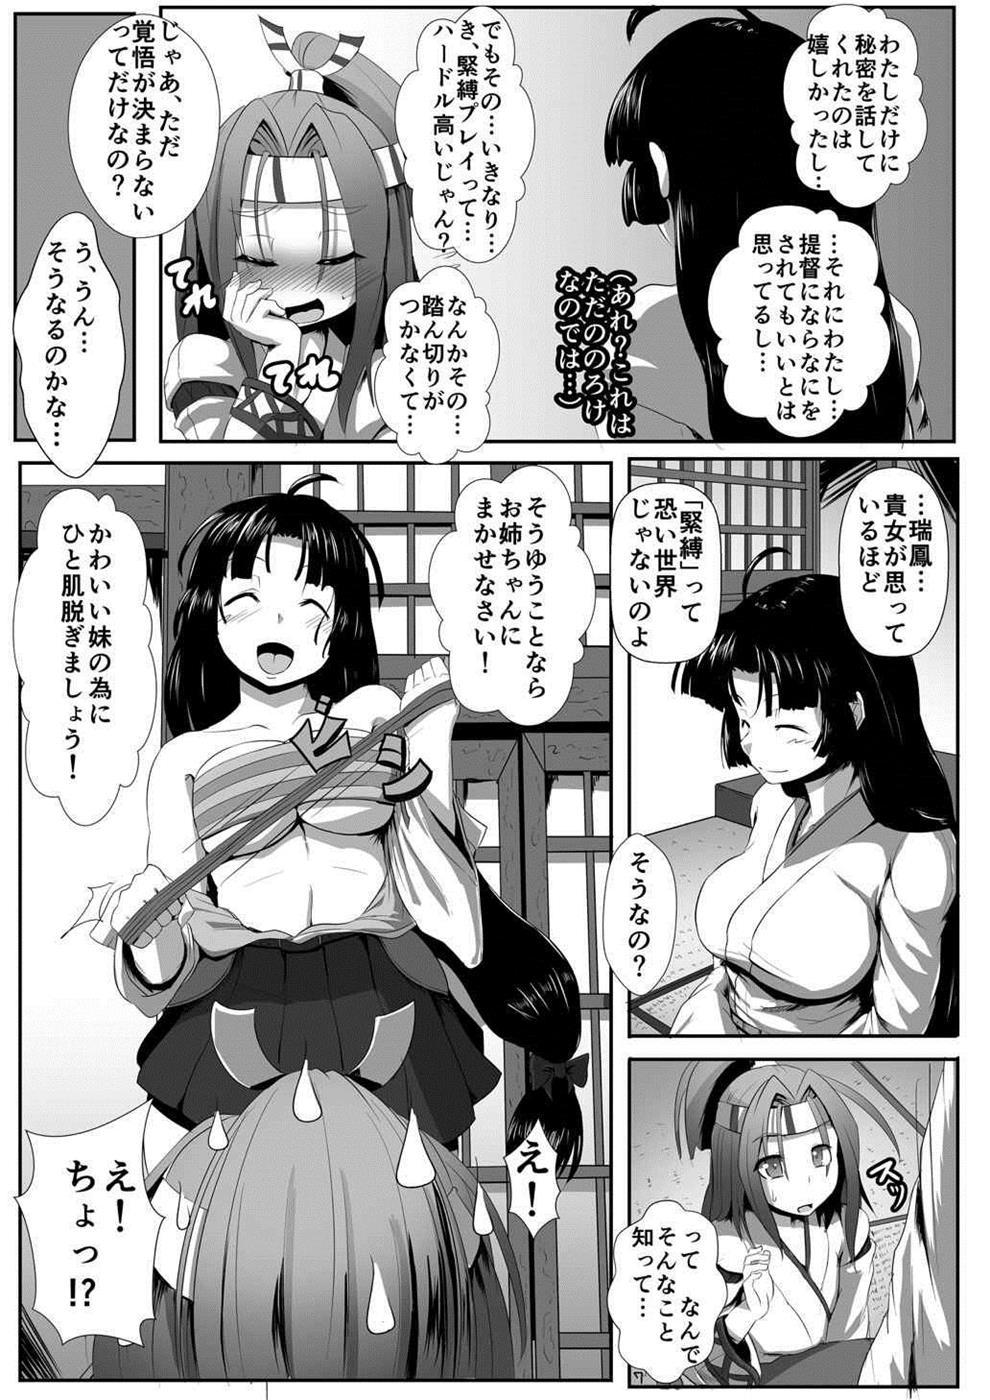 Pussy Fingering Zuihou Taberyu? - Kantai collection Thuylinh - Page 6